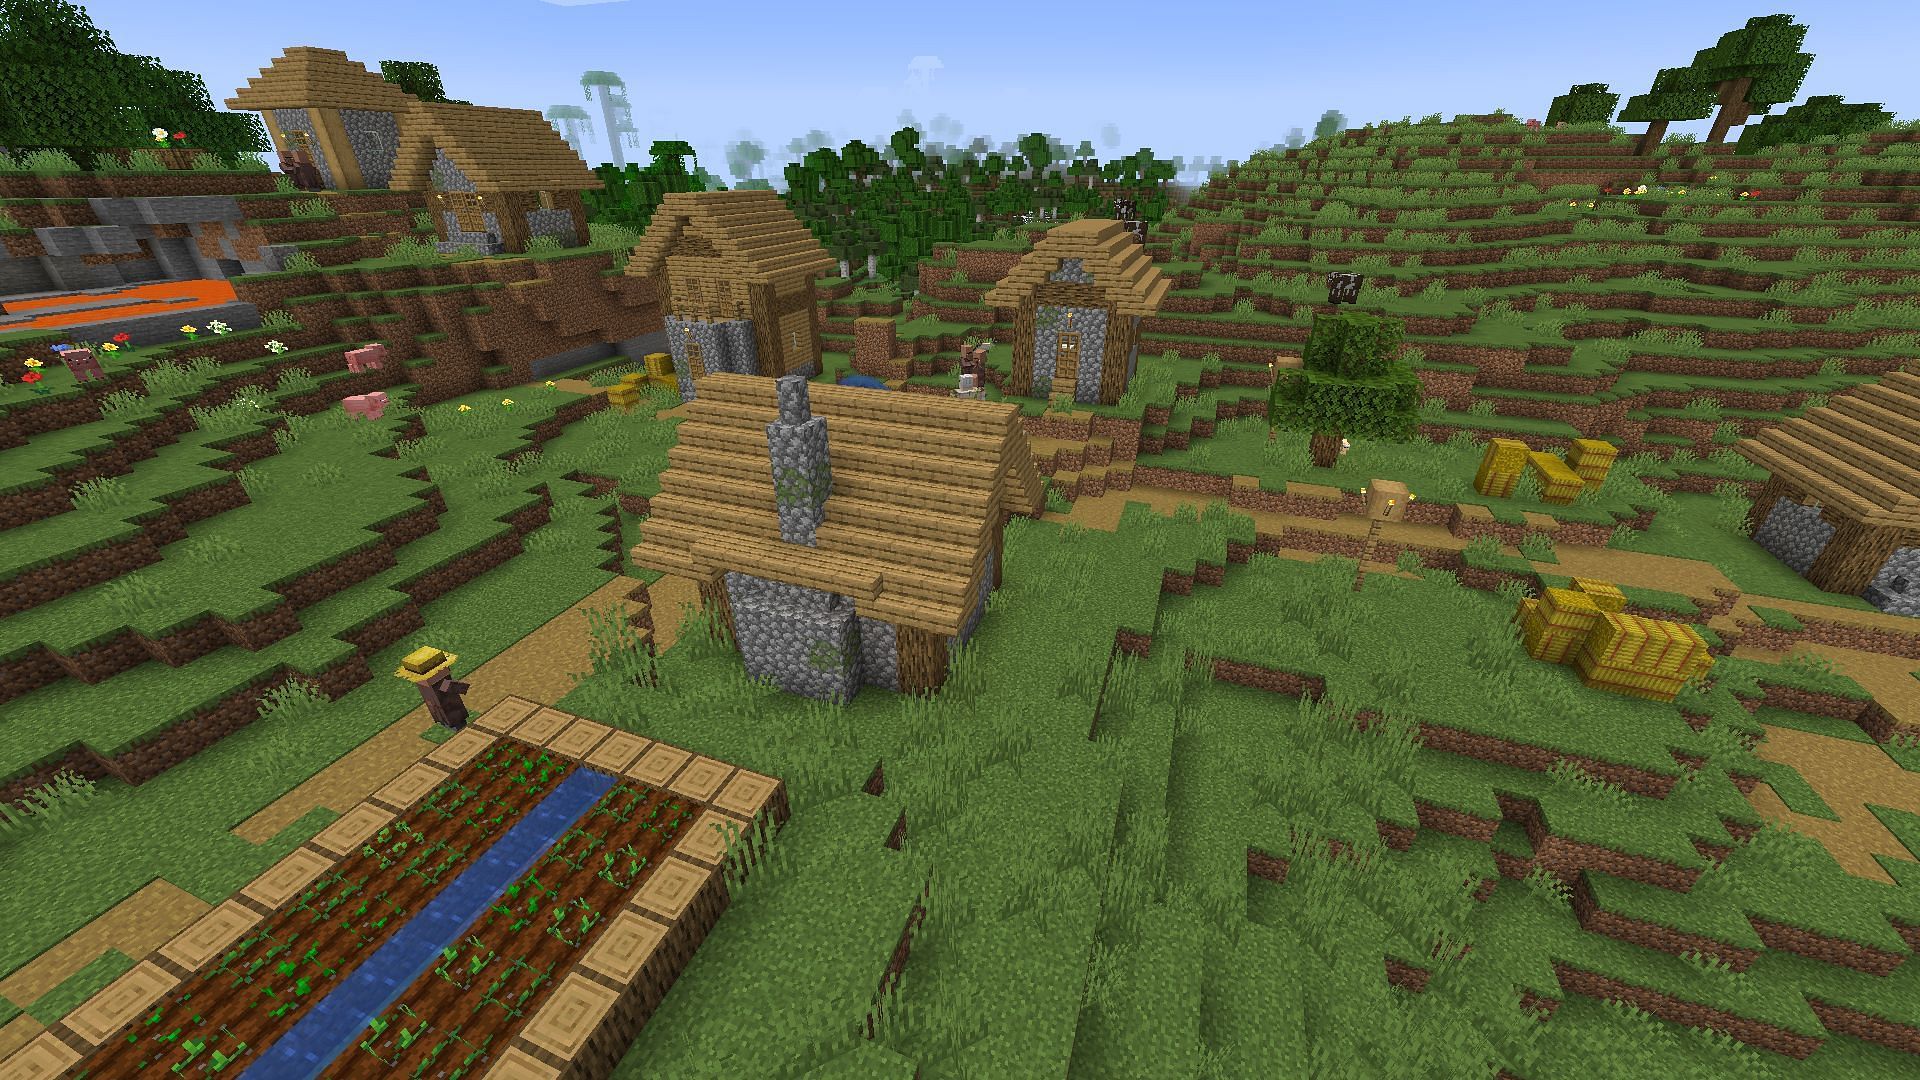 A plain plains village without a shader applied (Image via Minecraft)